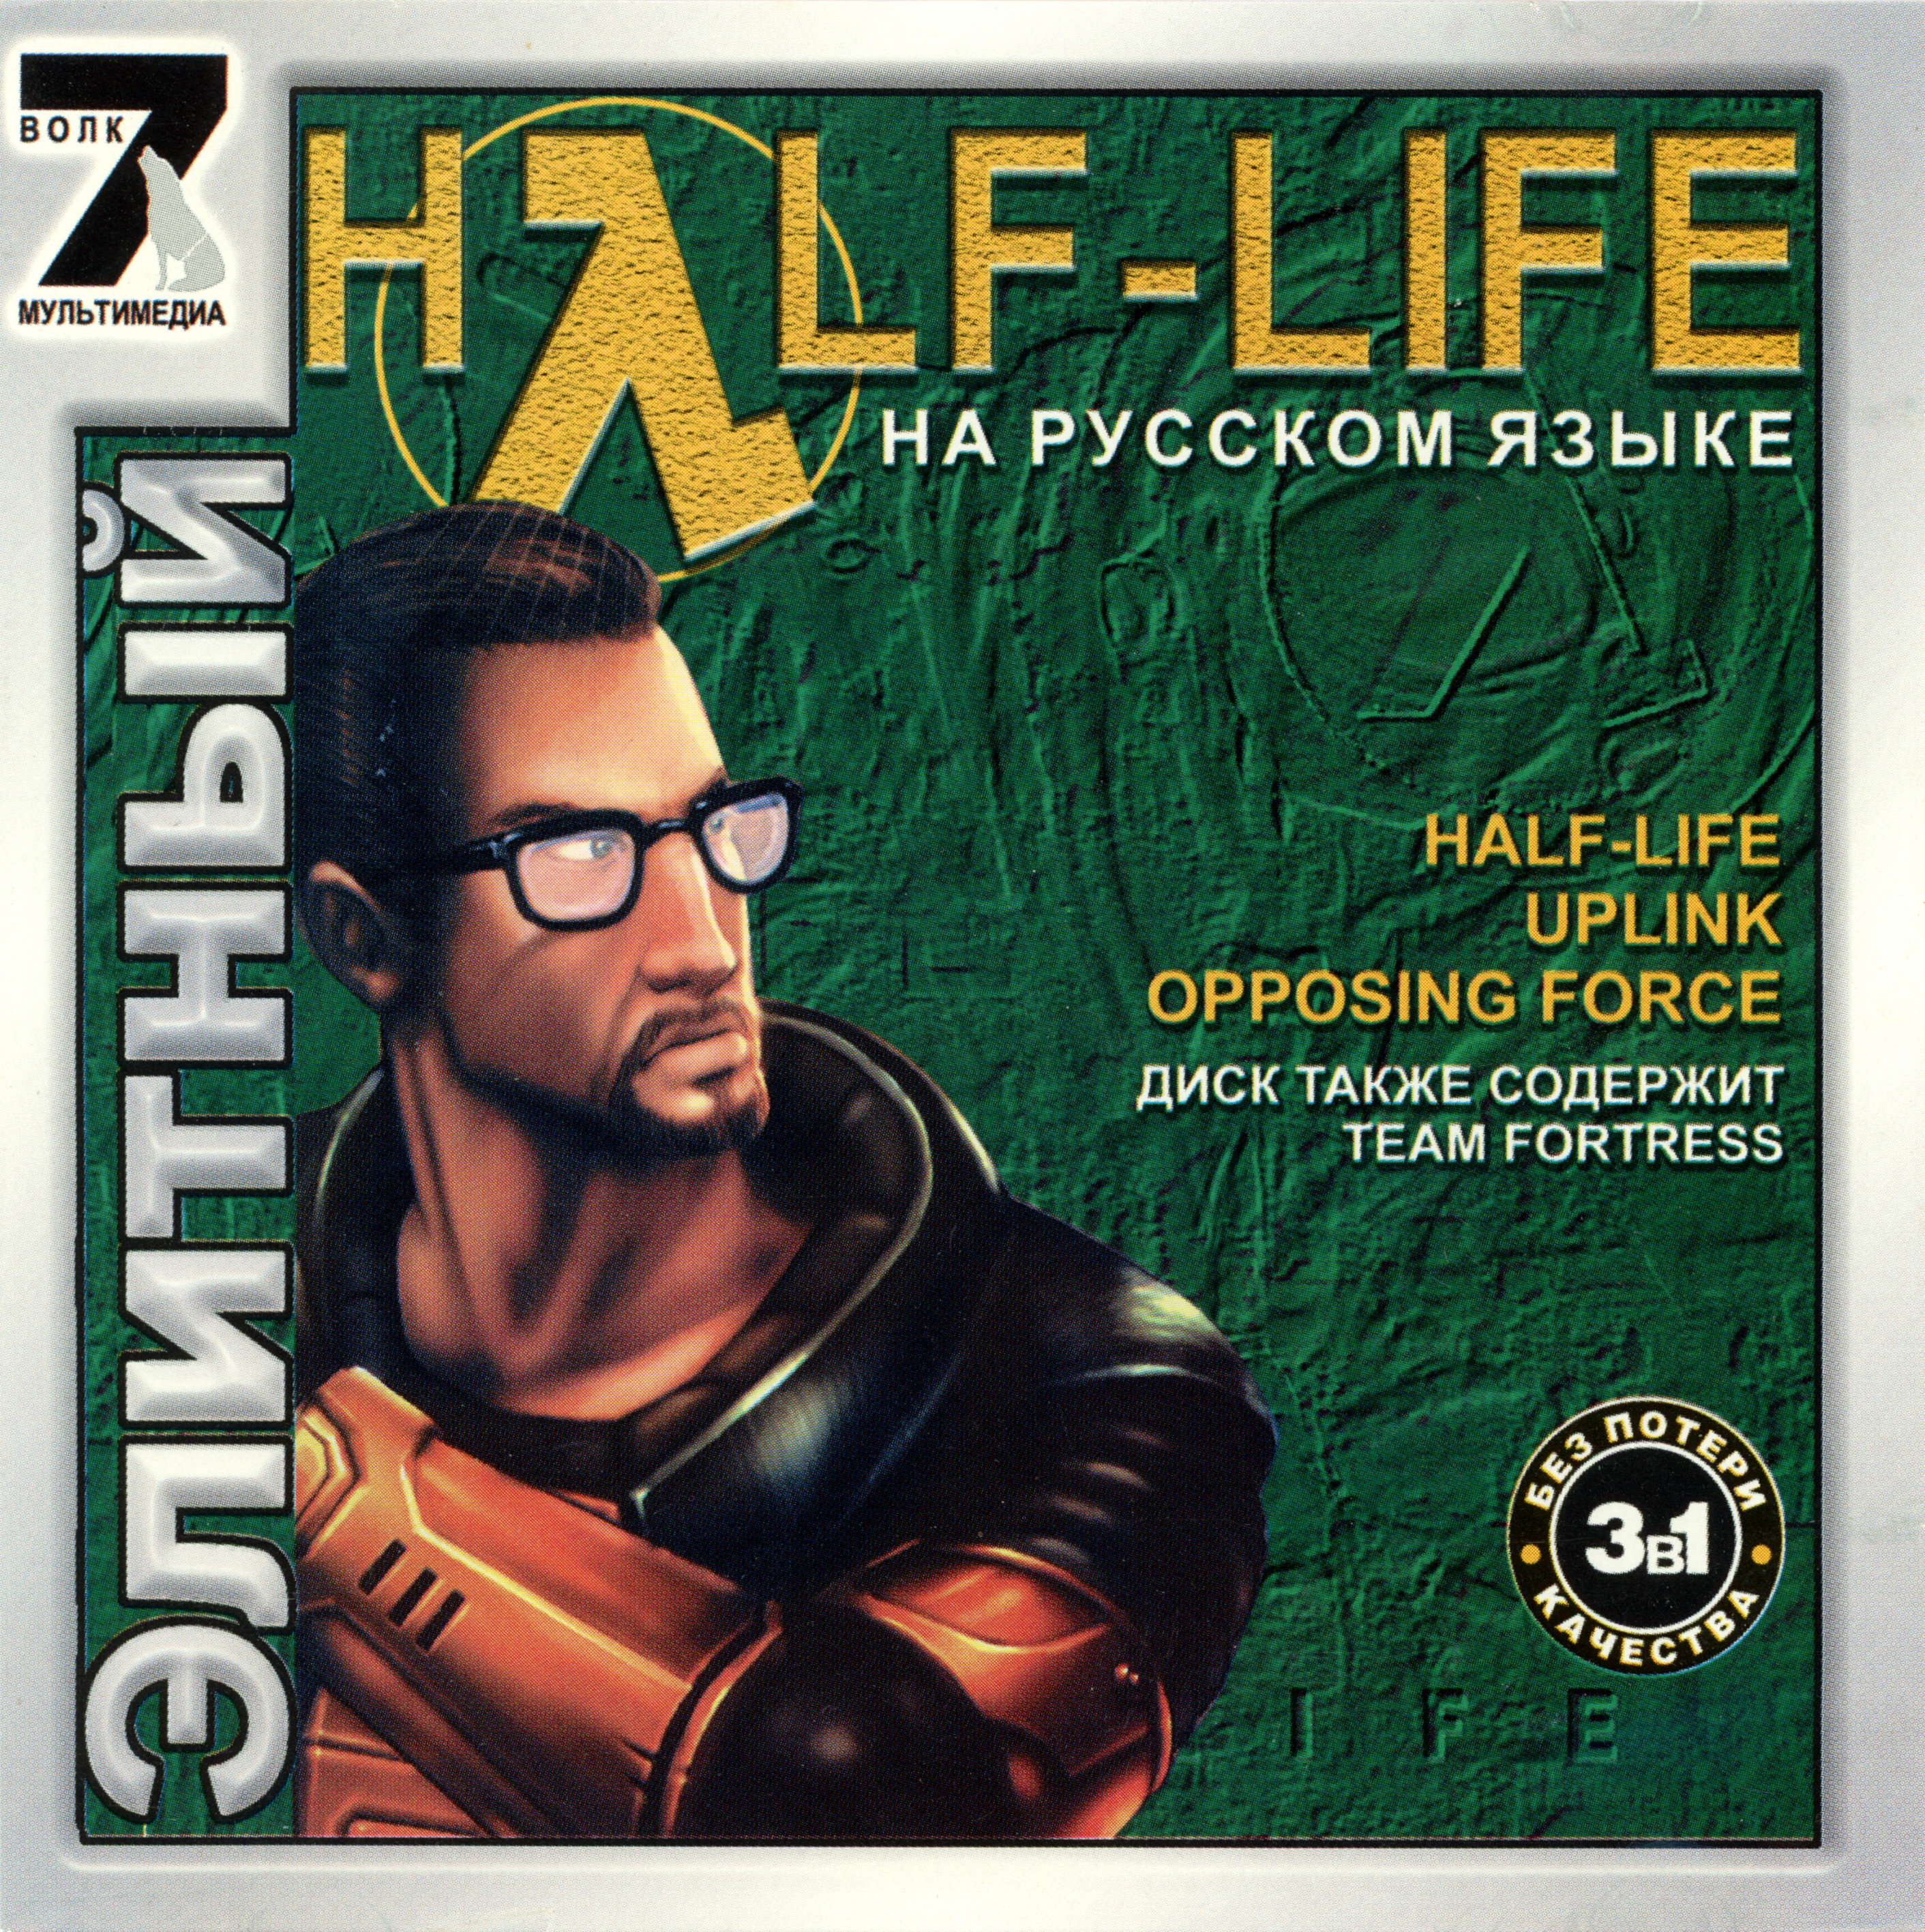 Please type in the cd key displayed on the half life cd case фото 108